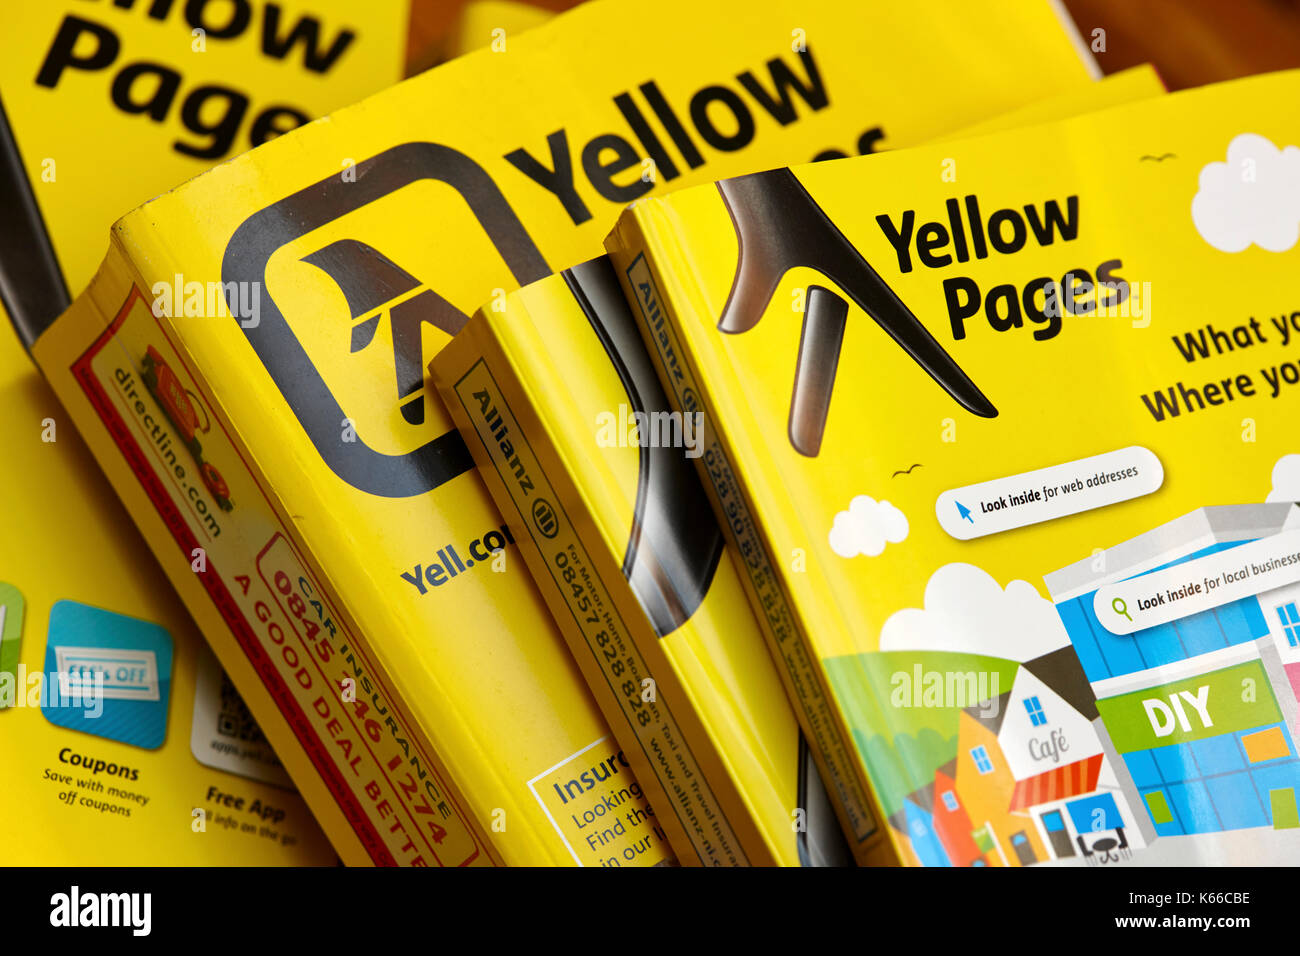 later smaller version of the yellow pages classified telephone